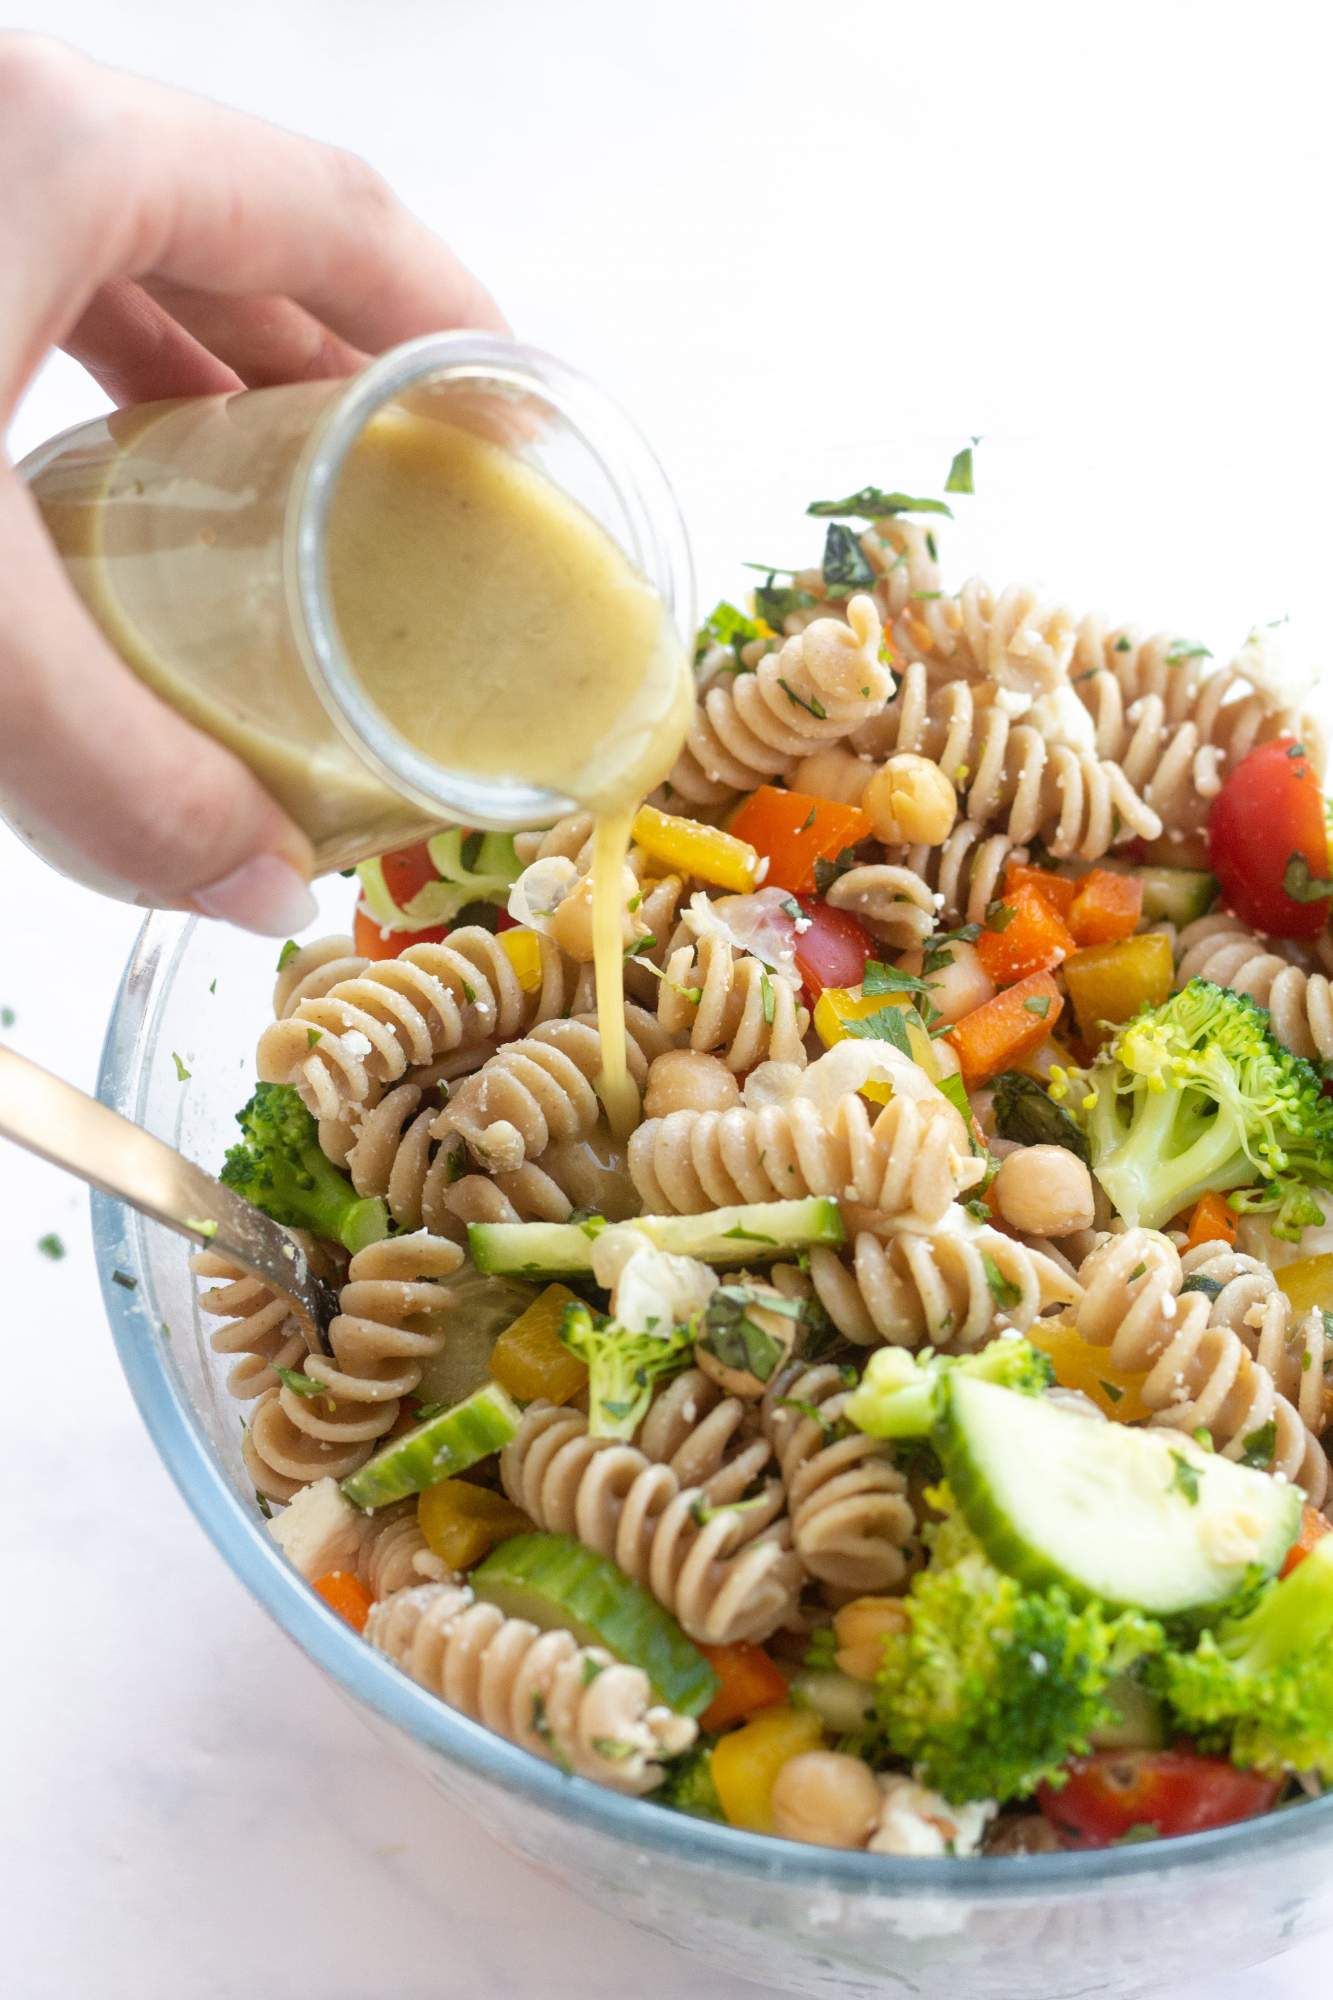 Whole wheat pasta salad in a bowl with cucumbers, broccoli, tomatoes, bell peppers, and feta cheese with dressing being poured on top.